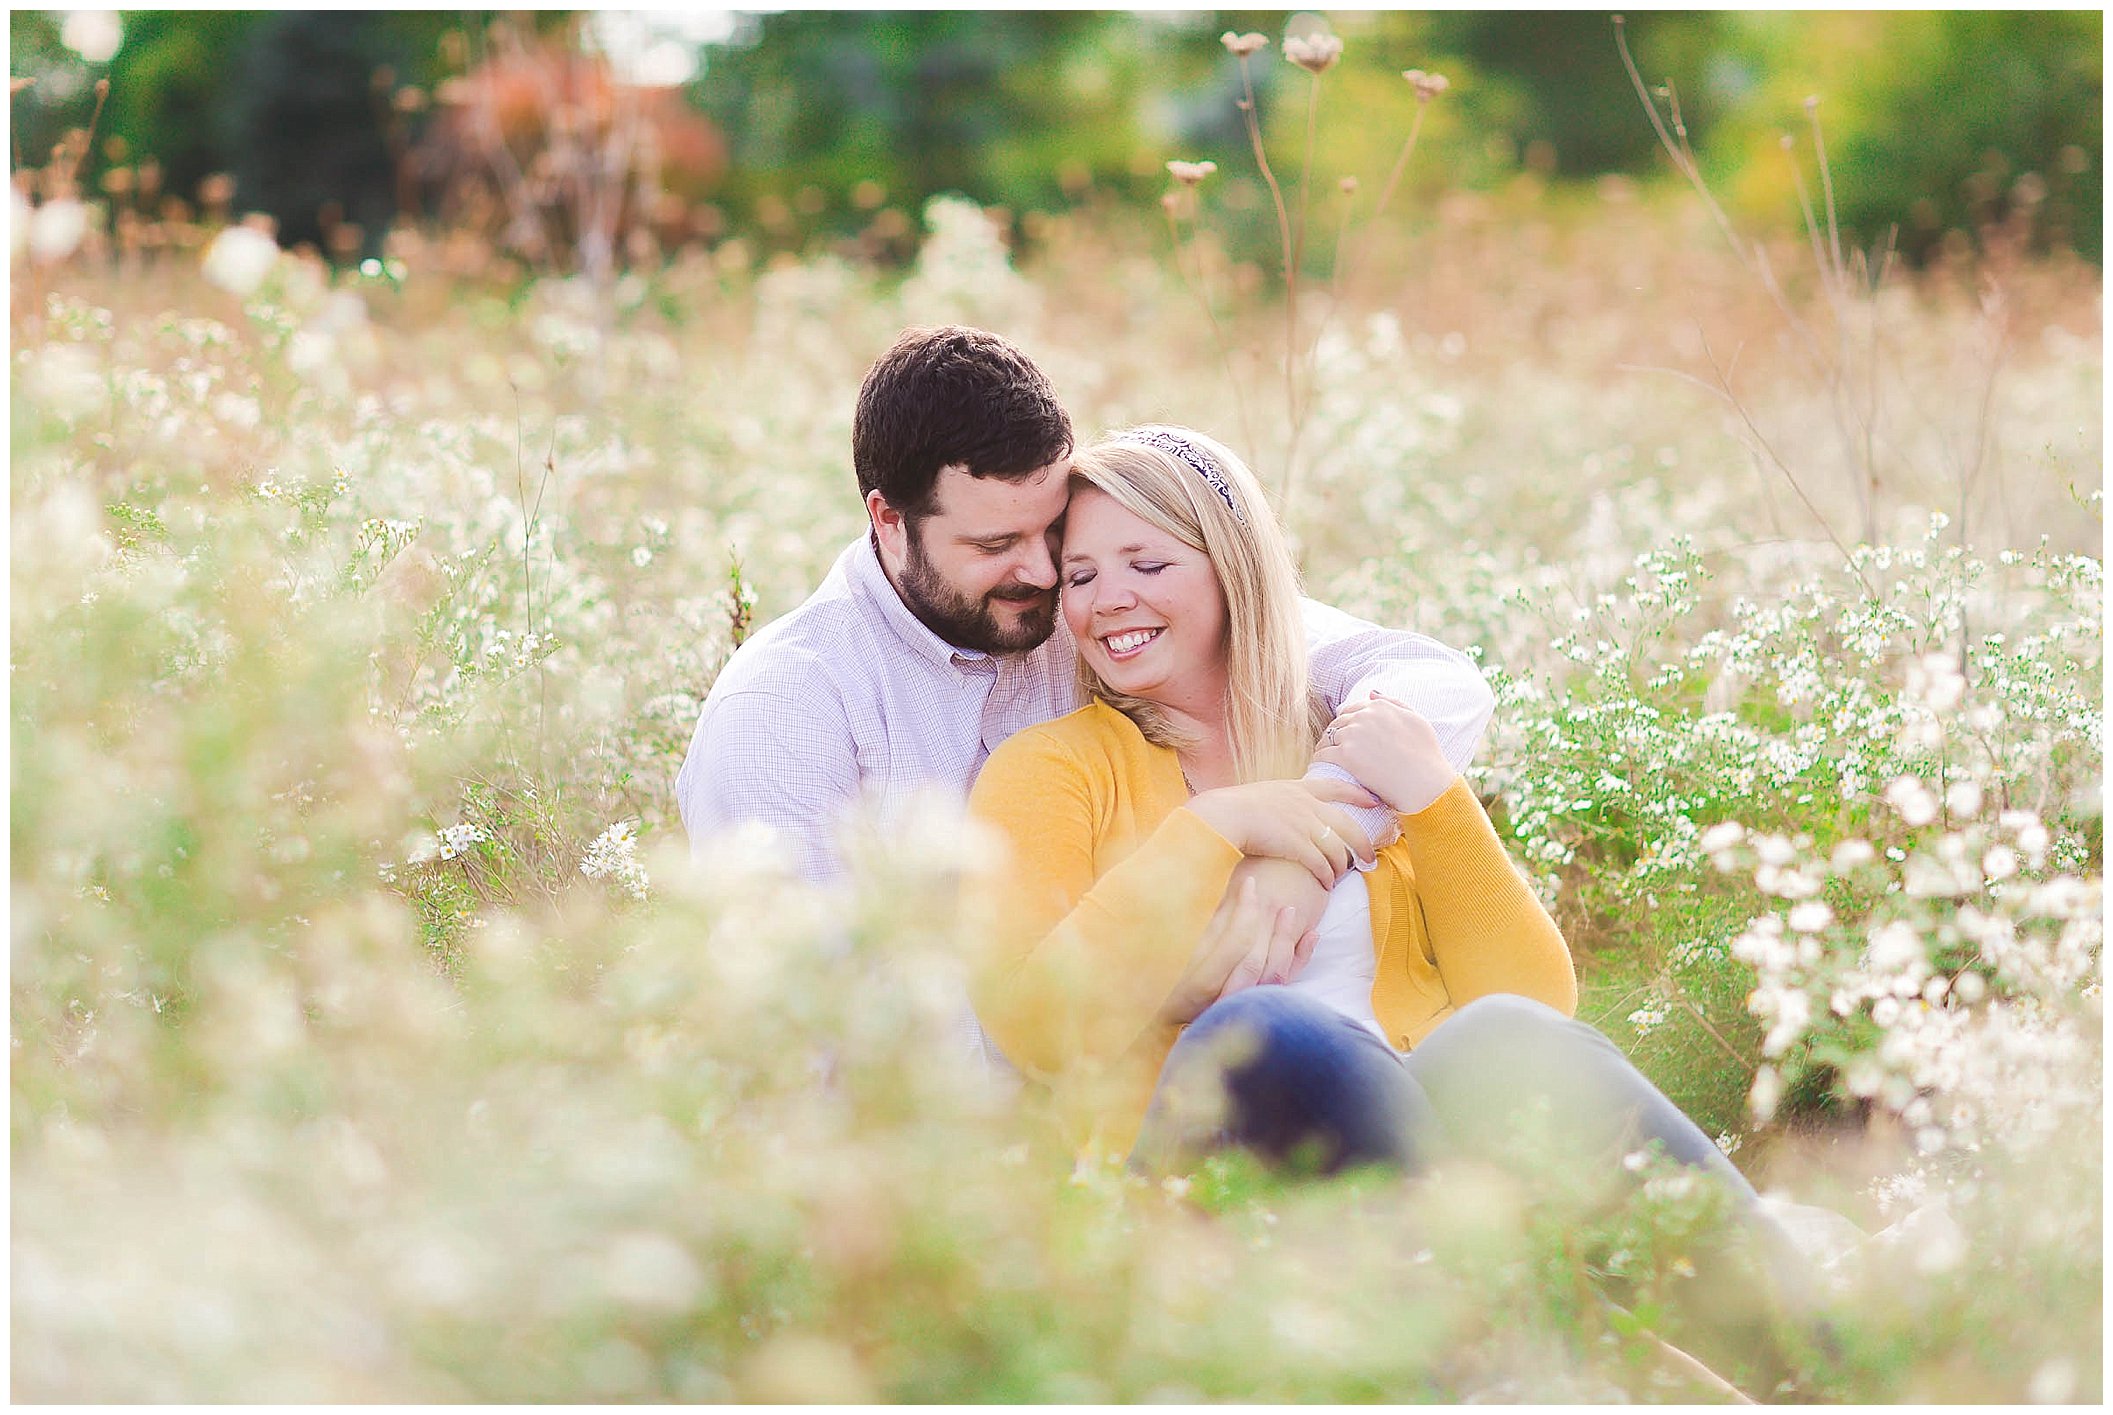 Sunshine filled engagement session in a field of wildflowers, Fort Wayne Indiana Wedding Photographer_0024.jpg